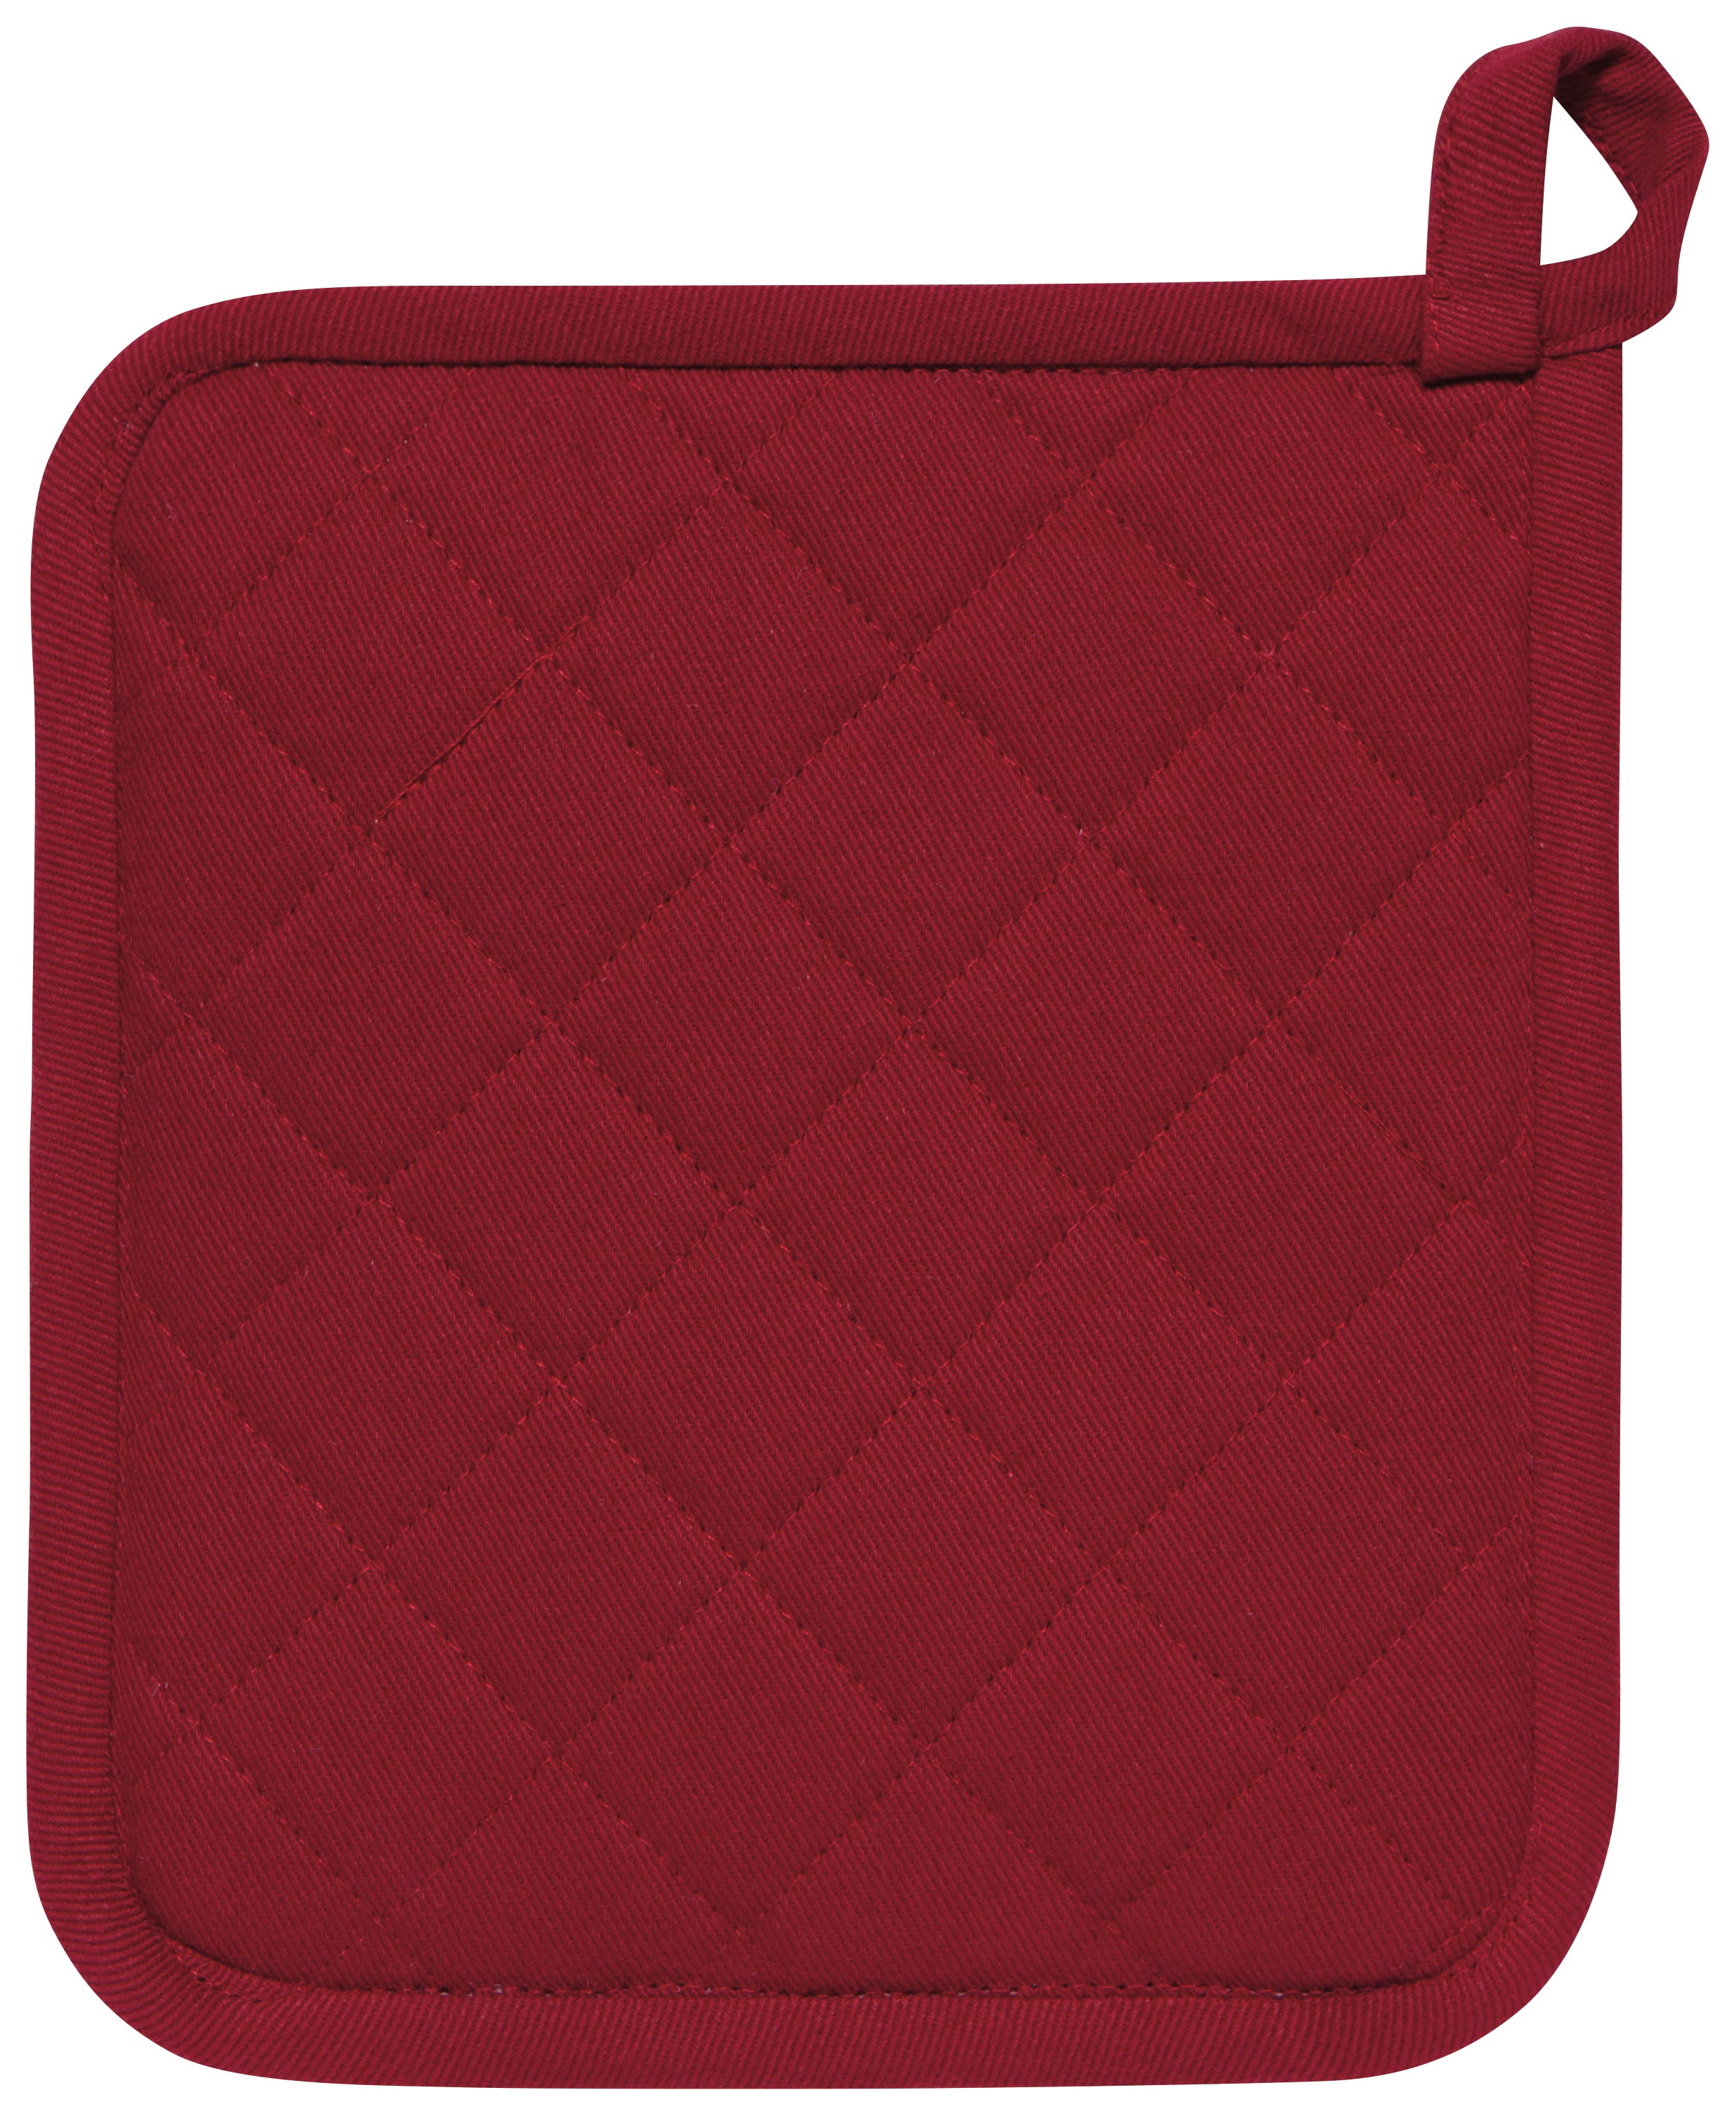 Carmin Red - Superior Potholders by Now Designs®